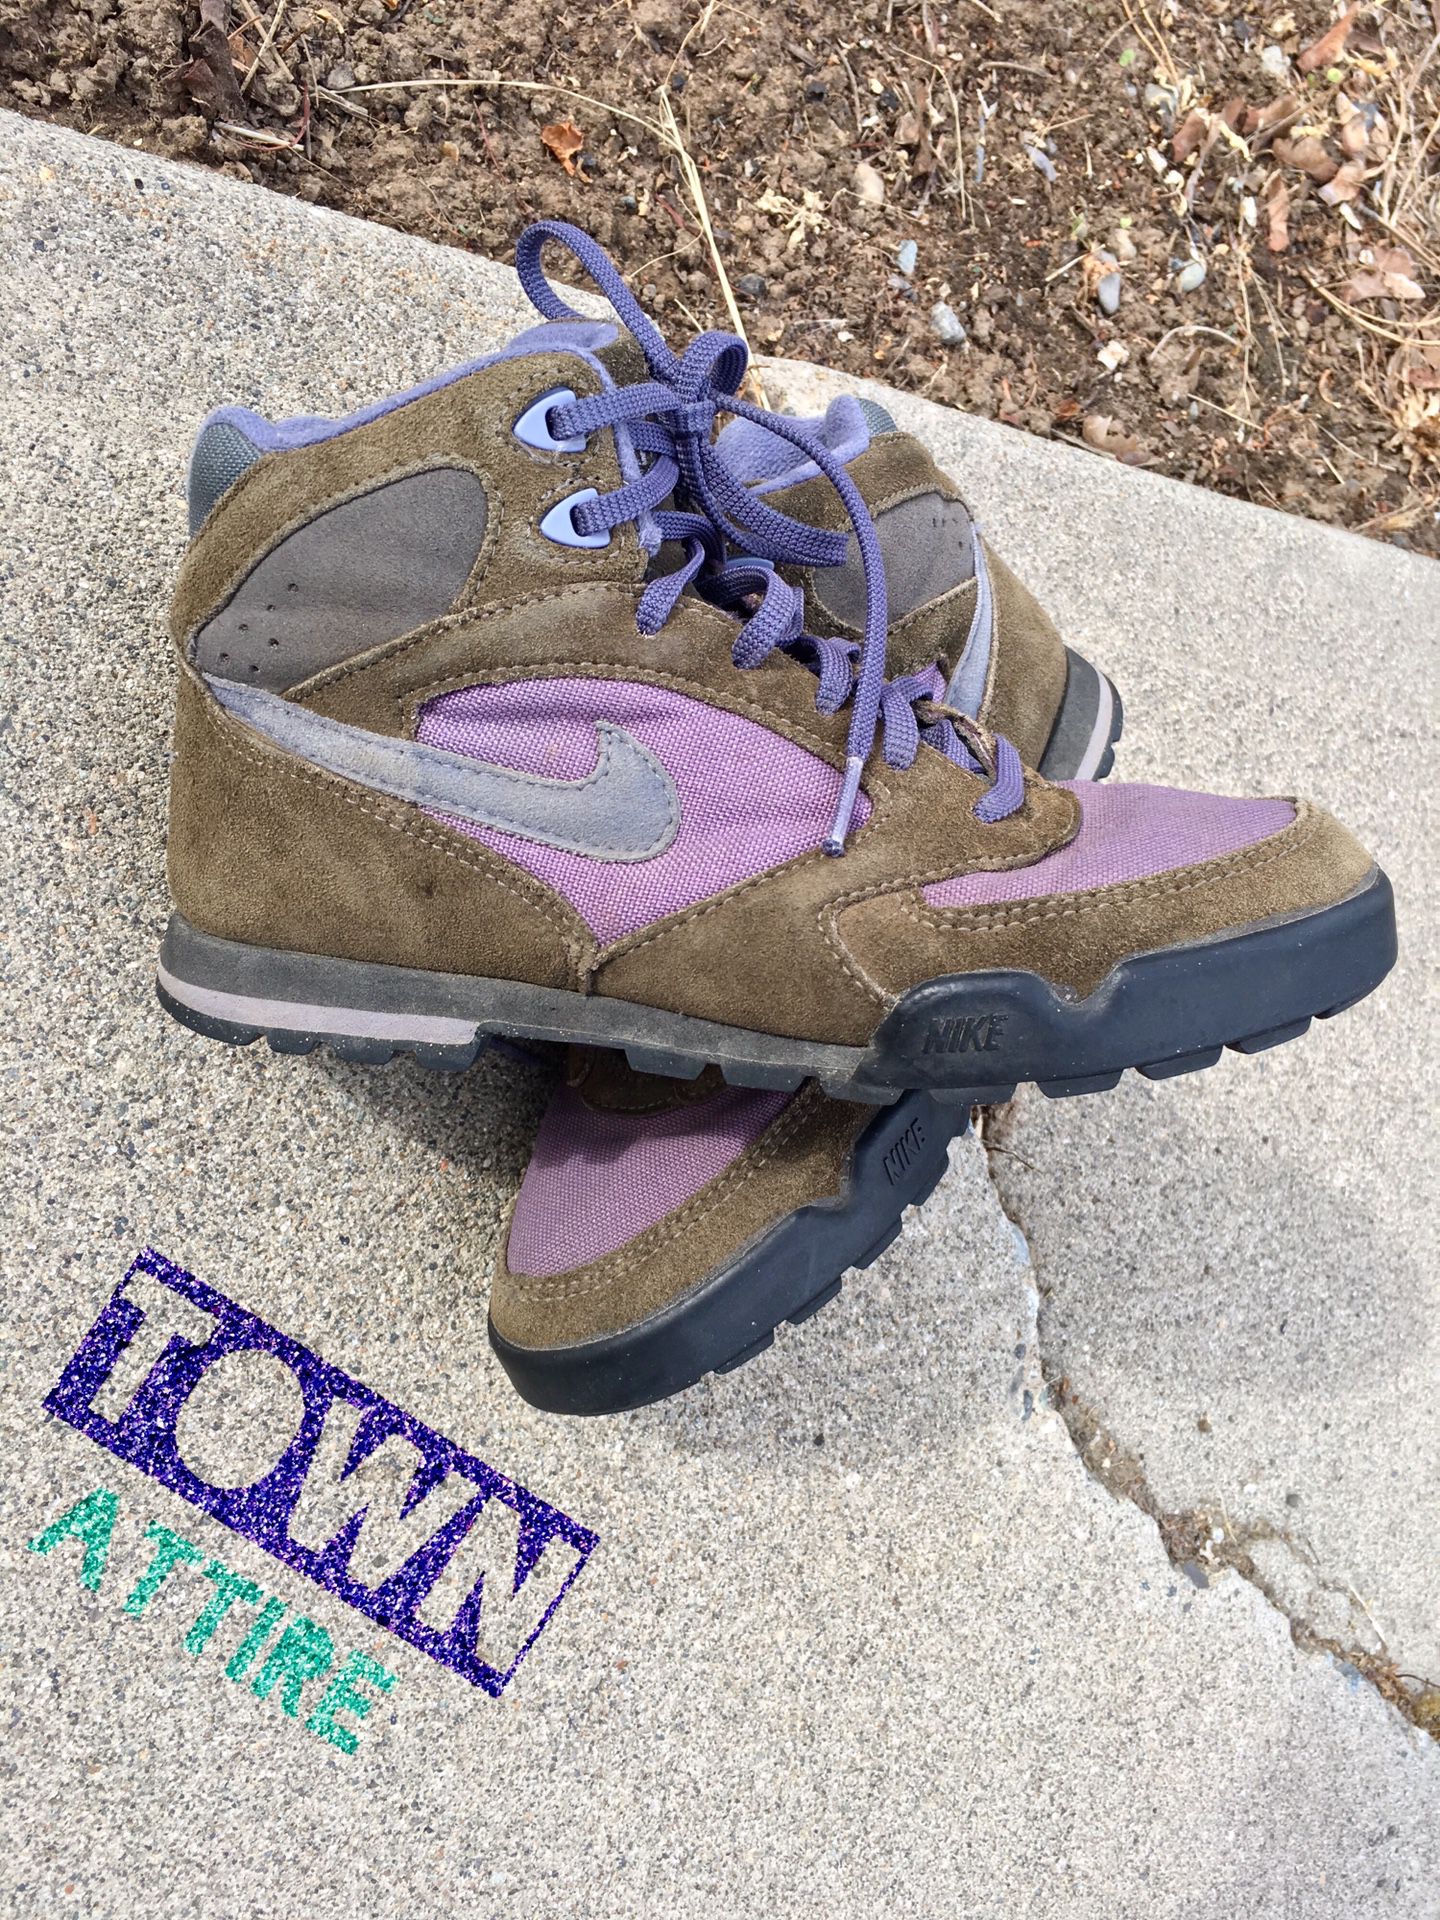 Vintage 90s Nike boots women’s size 8